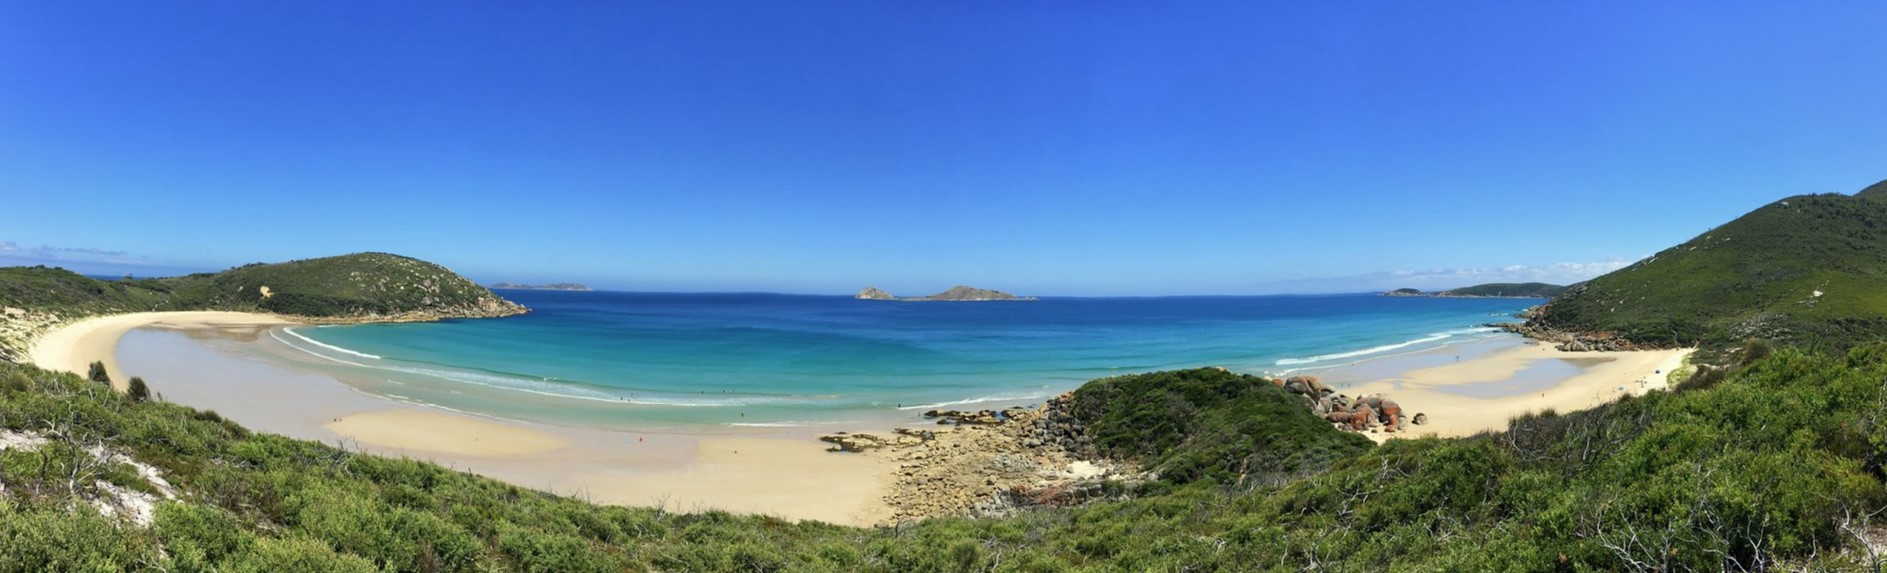 Wilsons Promontory Tours